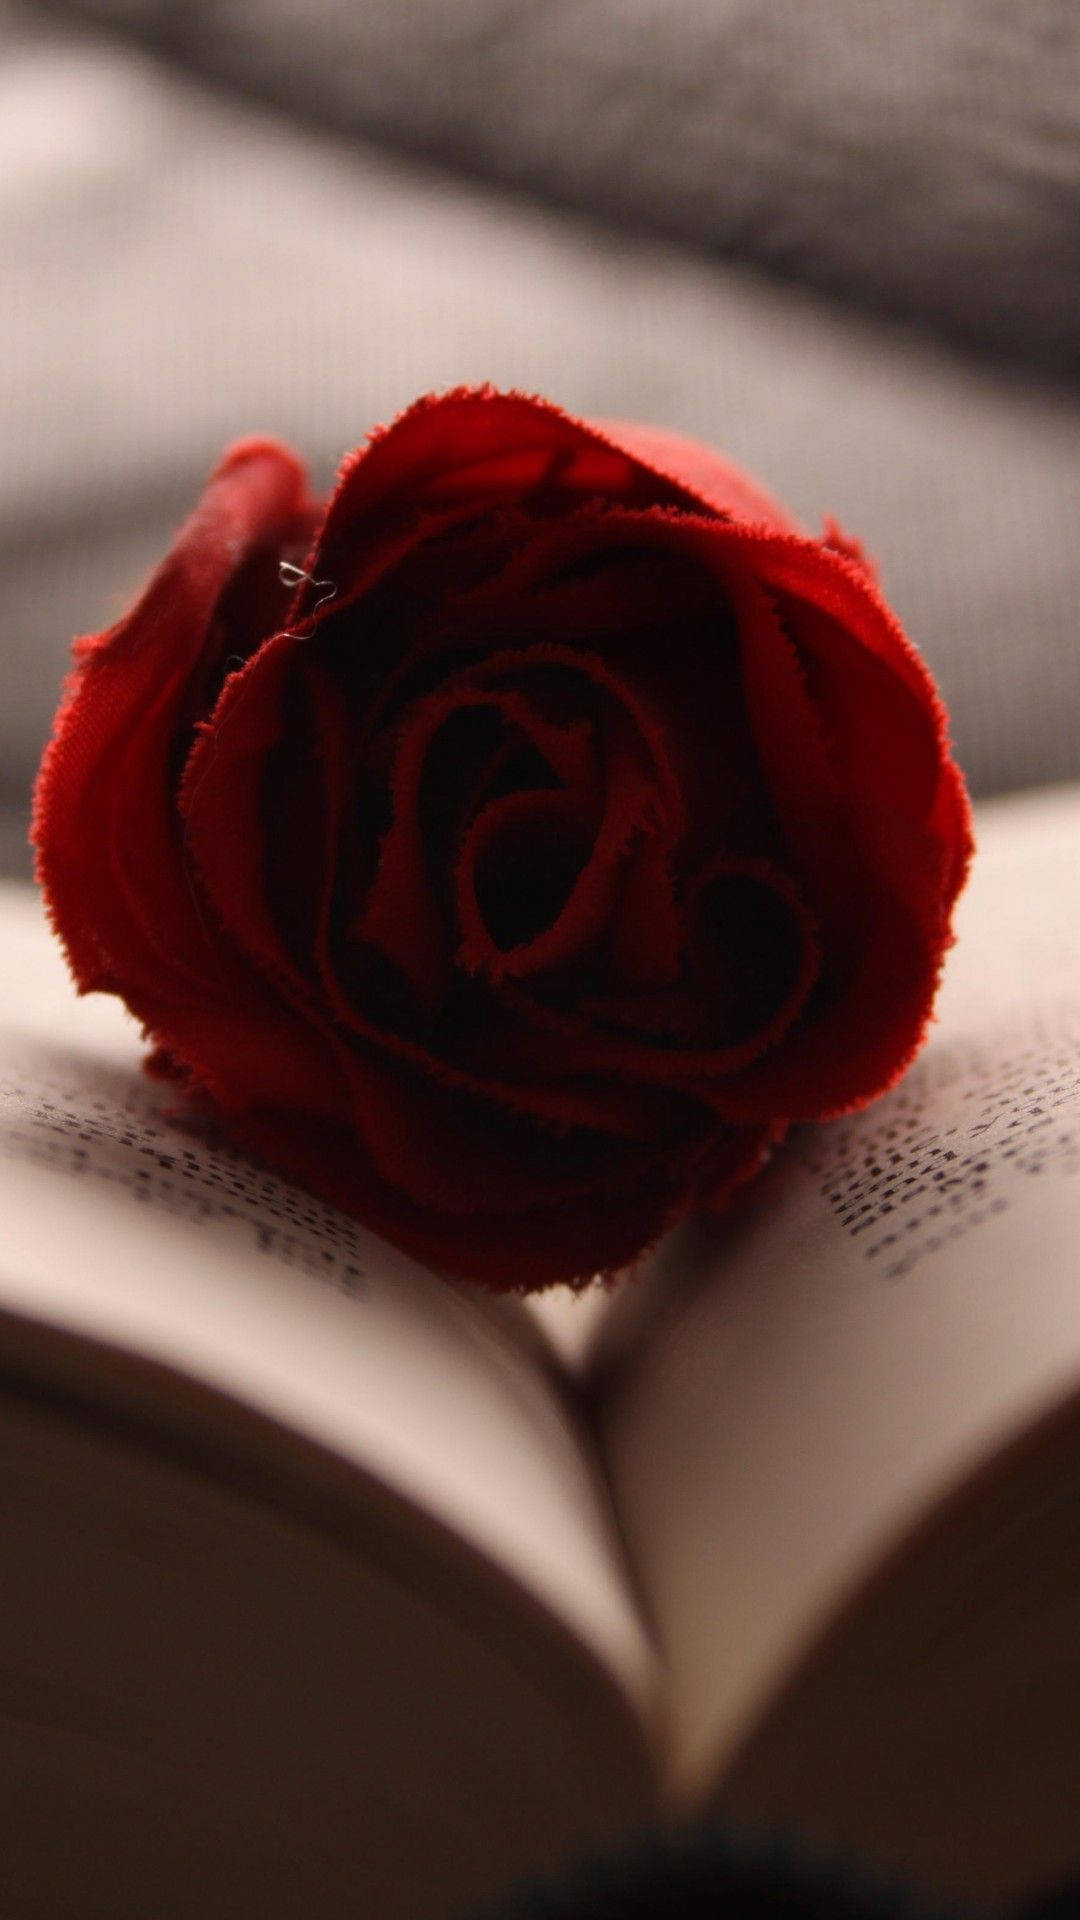 Book And Red Rose Iphone Background